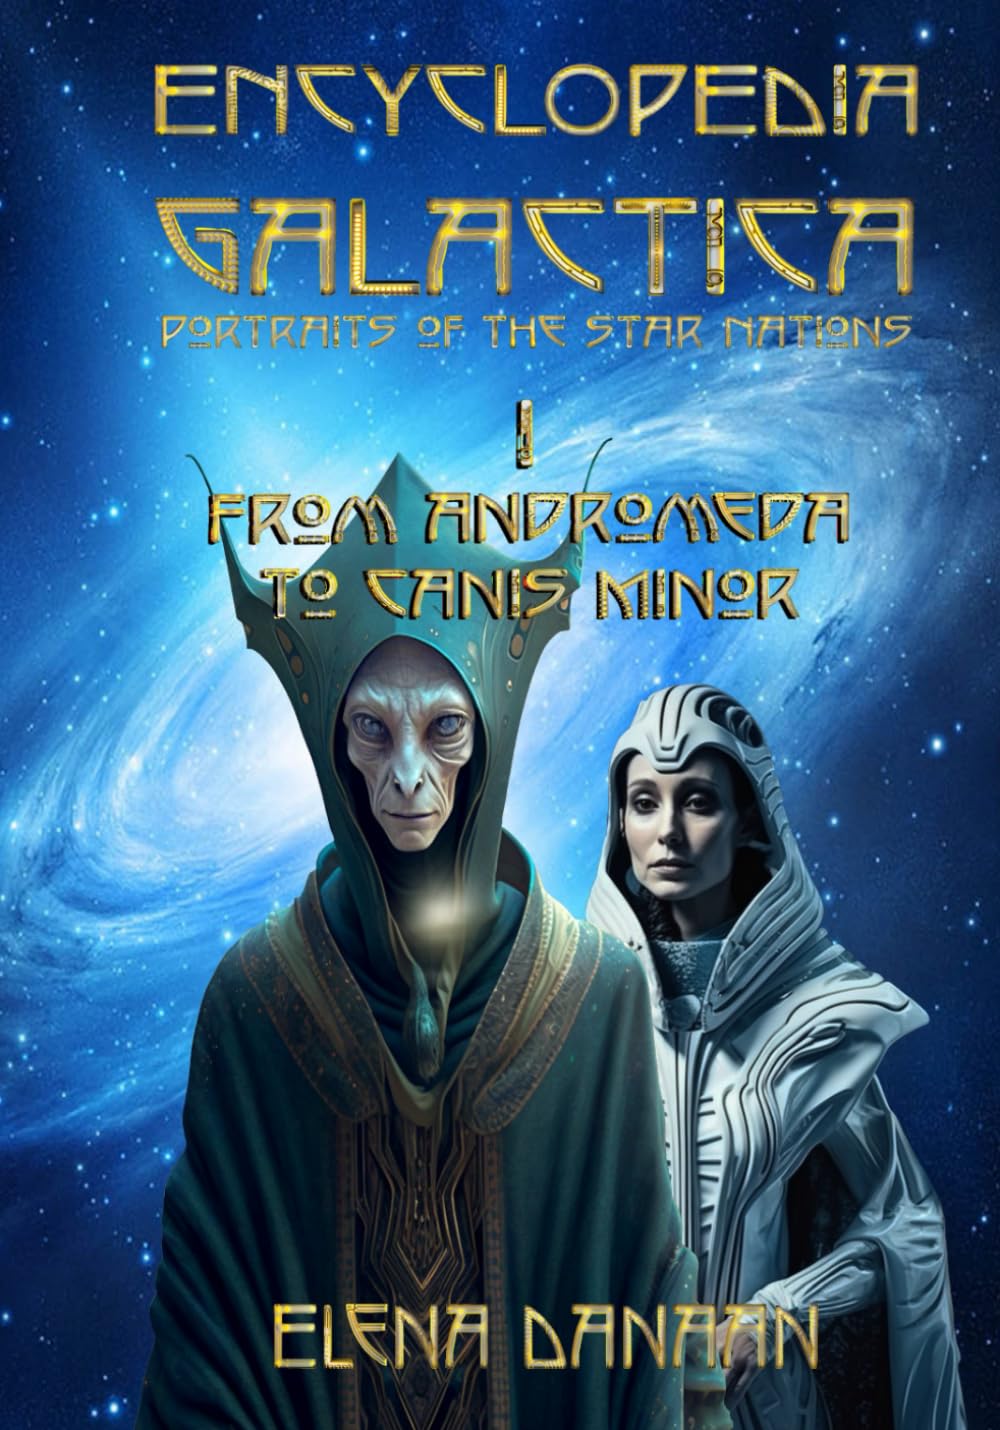 ENCYCLOPEDIA GALACTICA volume I: From Andromeda to Canis Minor